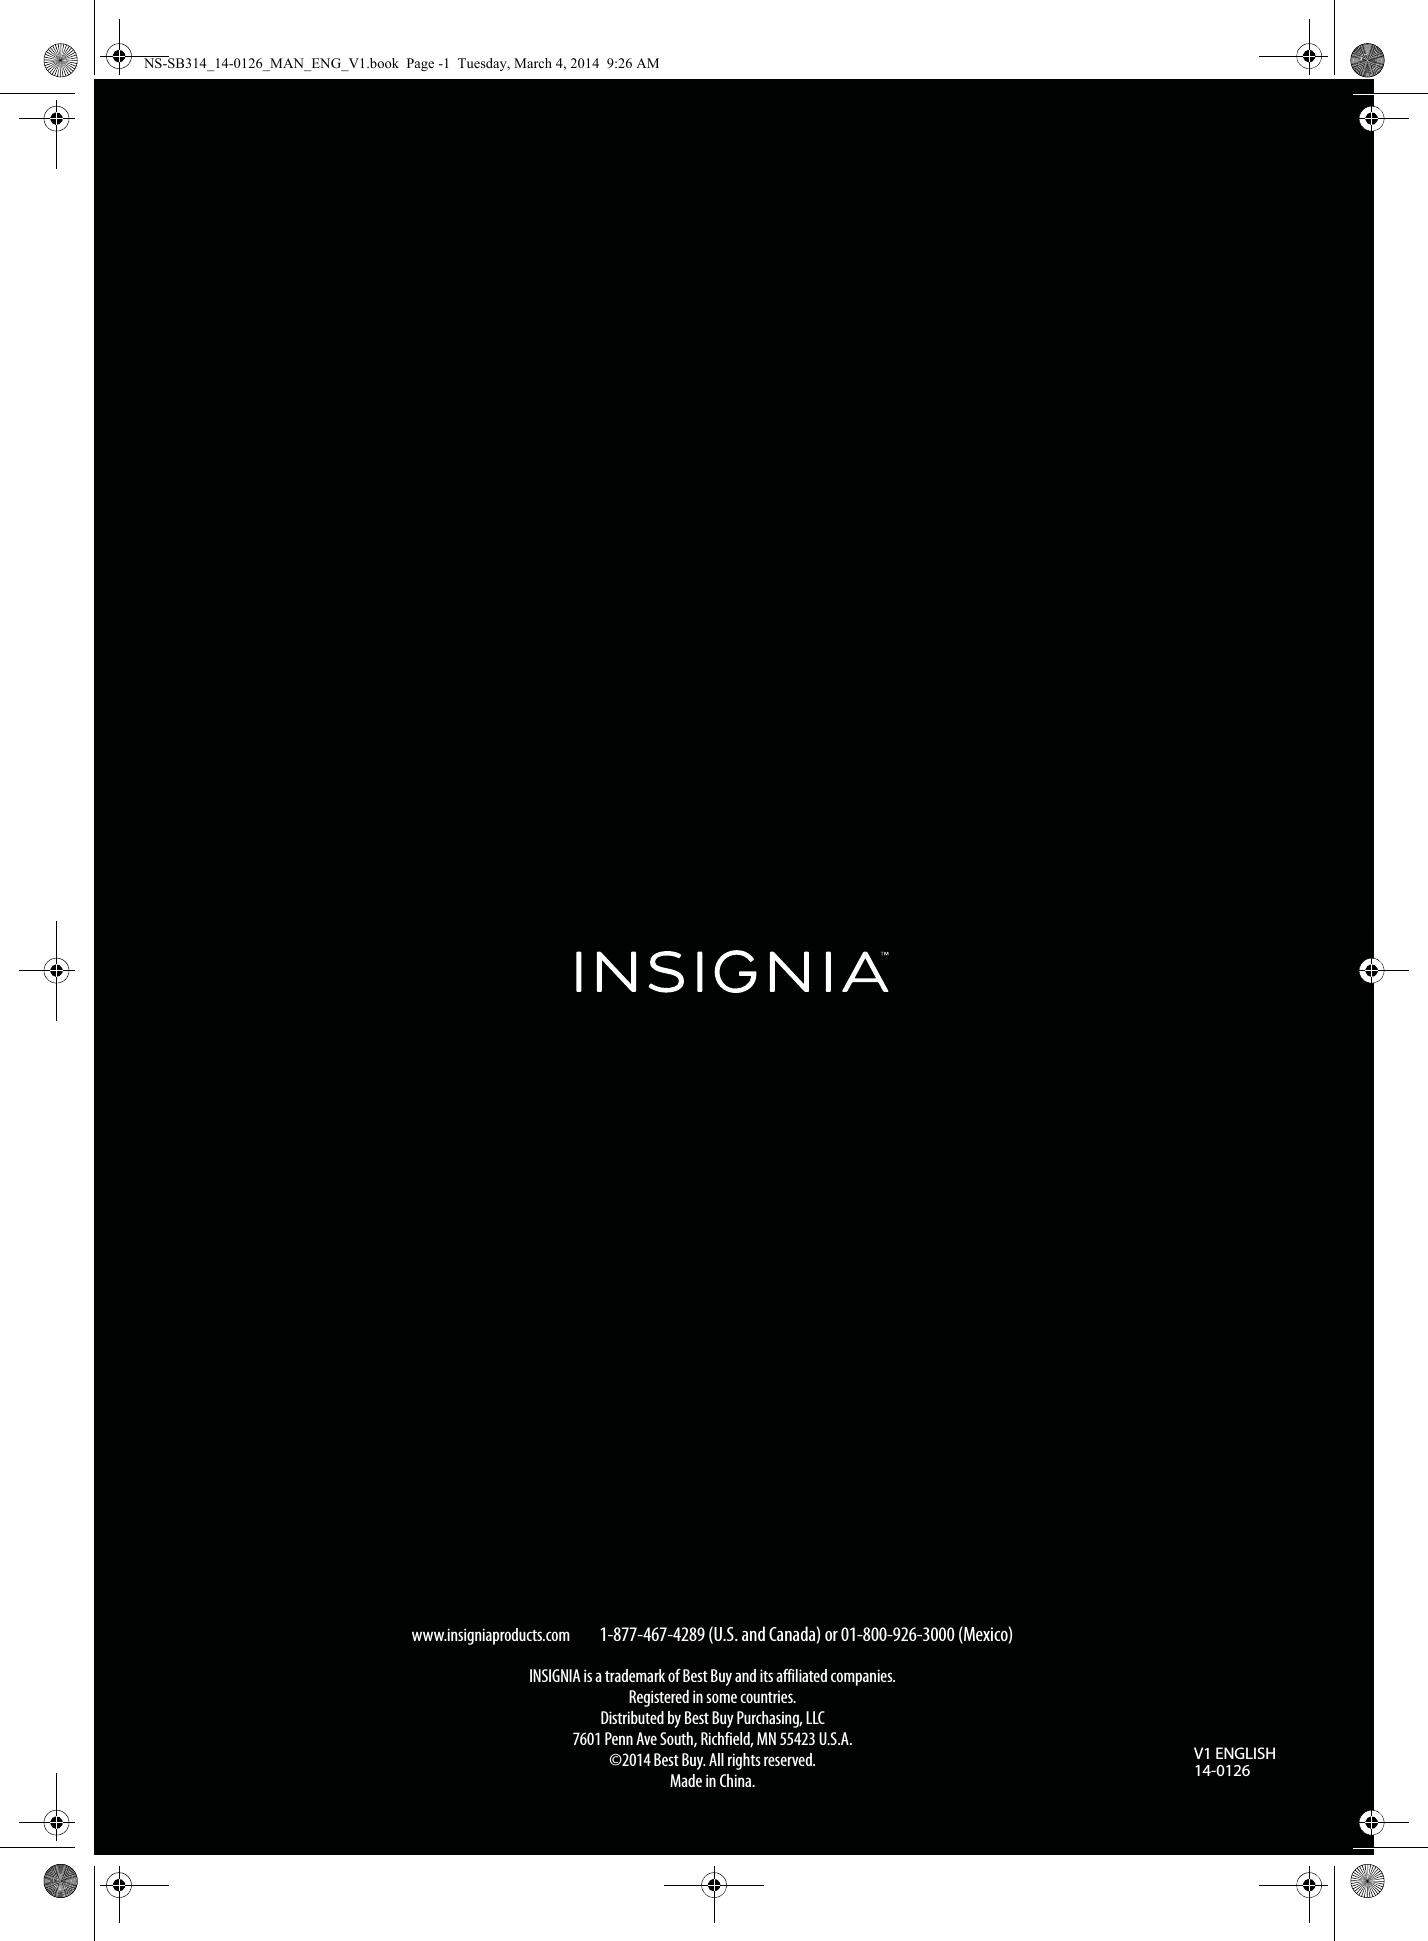 www.insigniaproducts.com1-877-467-4289 (U.S. and Canada) or 01-800-926-3000 (Mexico)INSIGNIA is a trademark of Best Buy and its affiliated companies.Registered in some countries.Distributed by Best Buy Purchasing, LLC7601 Penn Ave South, Richfield, MN 55423 U.S.A.©2014 Best Buy. All rights reserved.Made in China.V1 ENGLISH14-0126NS-SB314_14-0126_MAN_ENG_V1.book  Page -1  Tuesday, March 4, 2014  9:26 AM